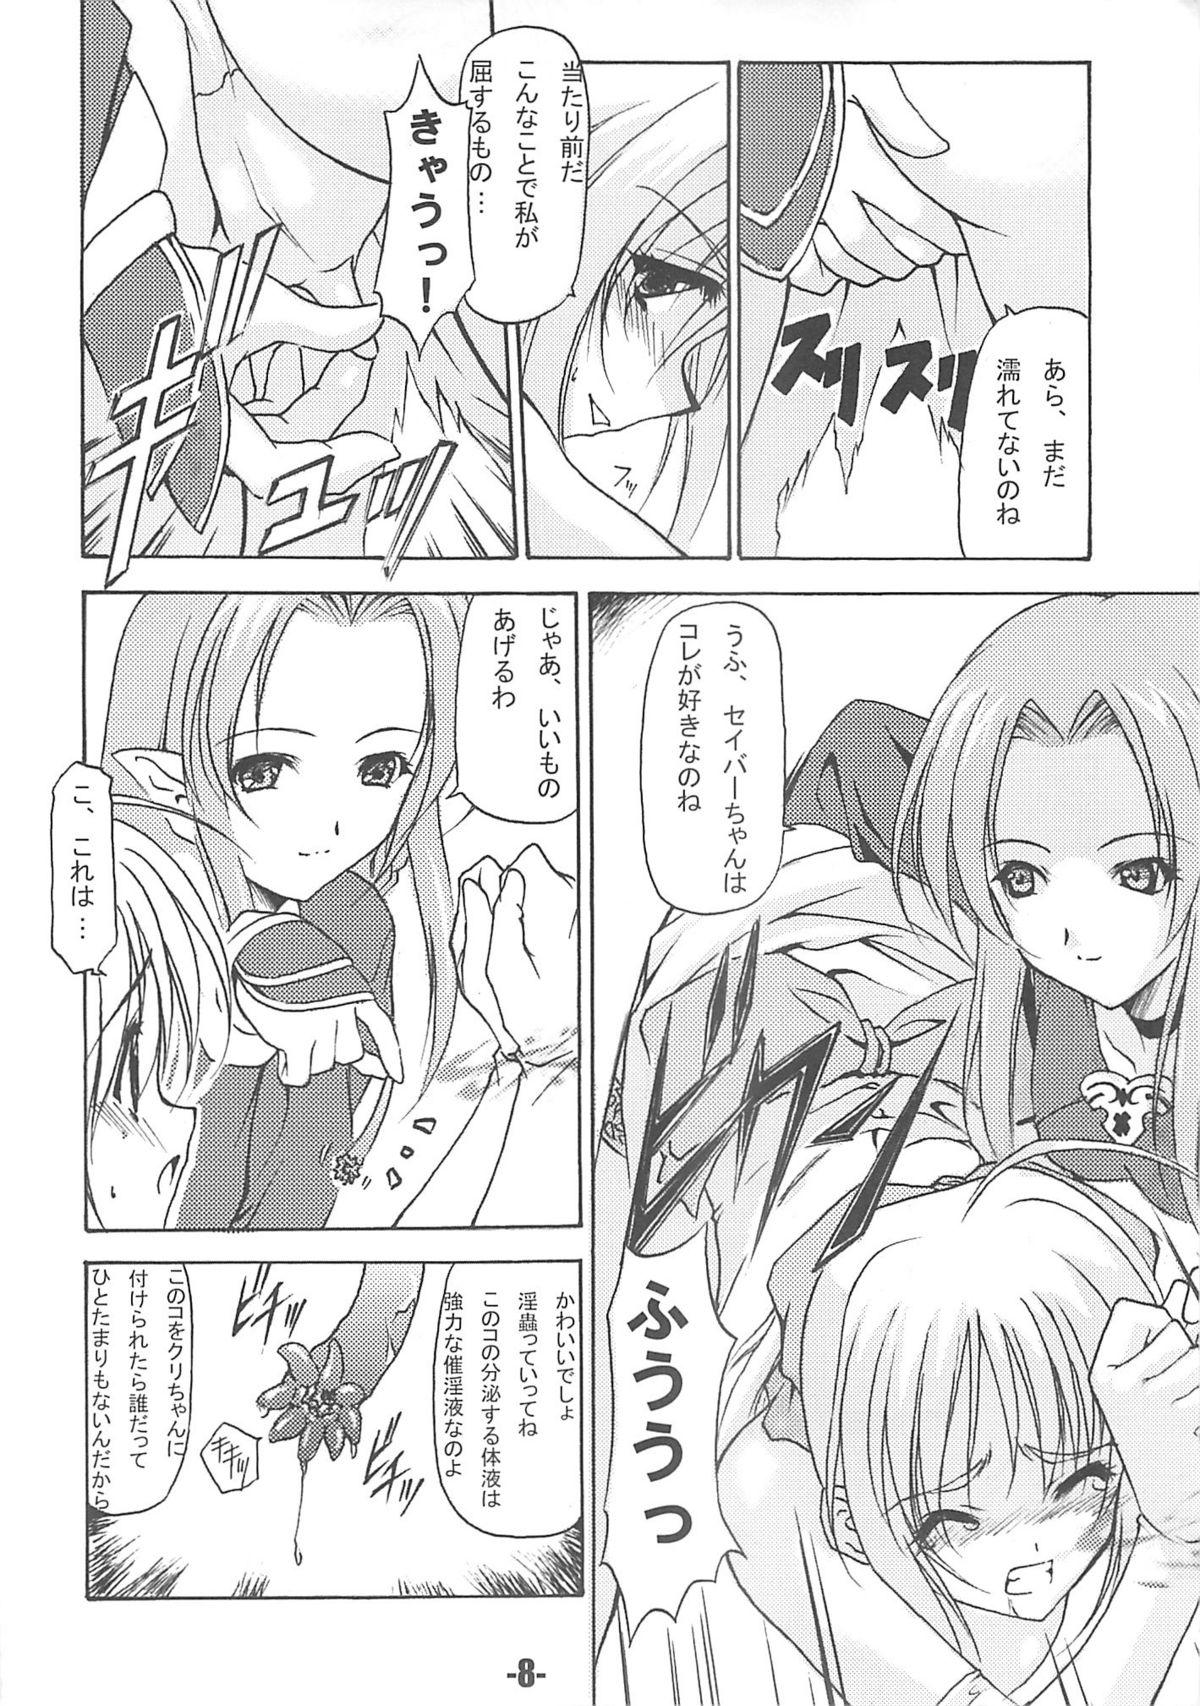 Prostitute EXtra stage vol. 13 - Fate stay night Teenies - Page 7